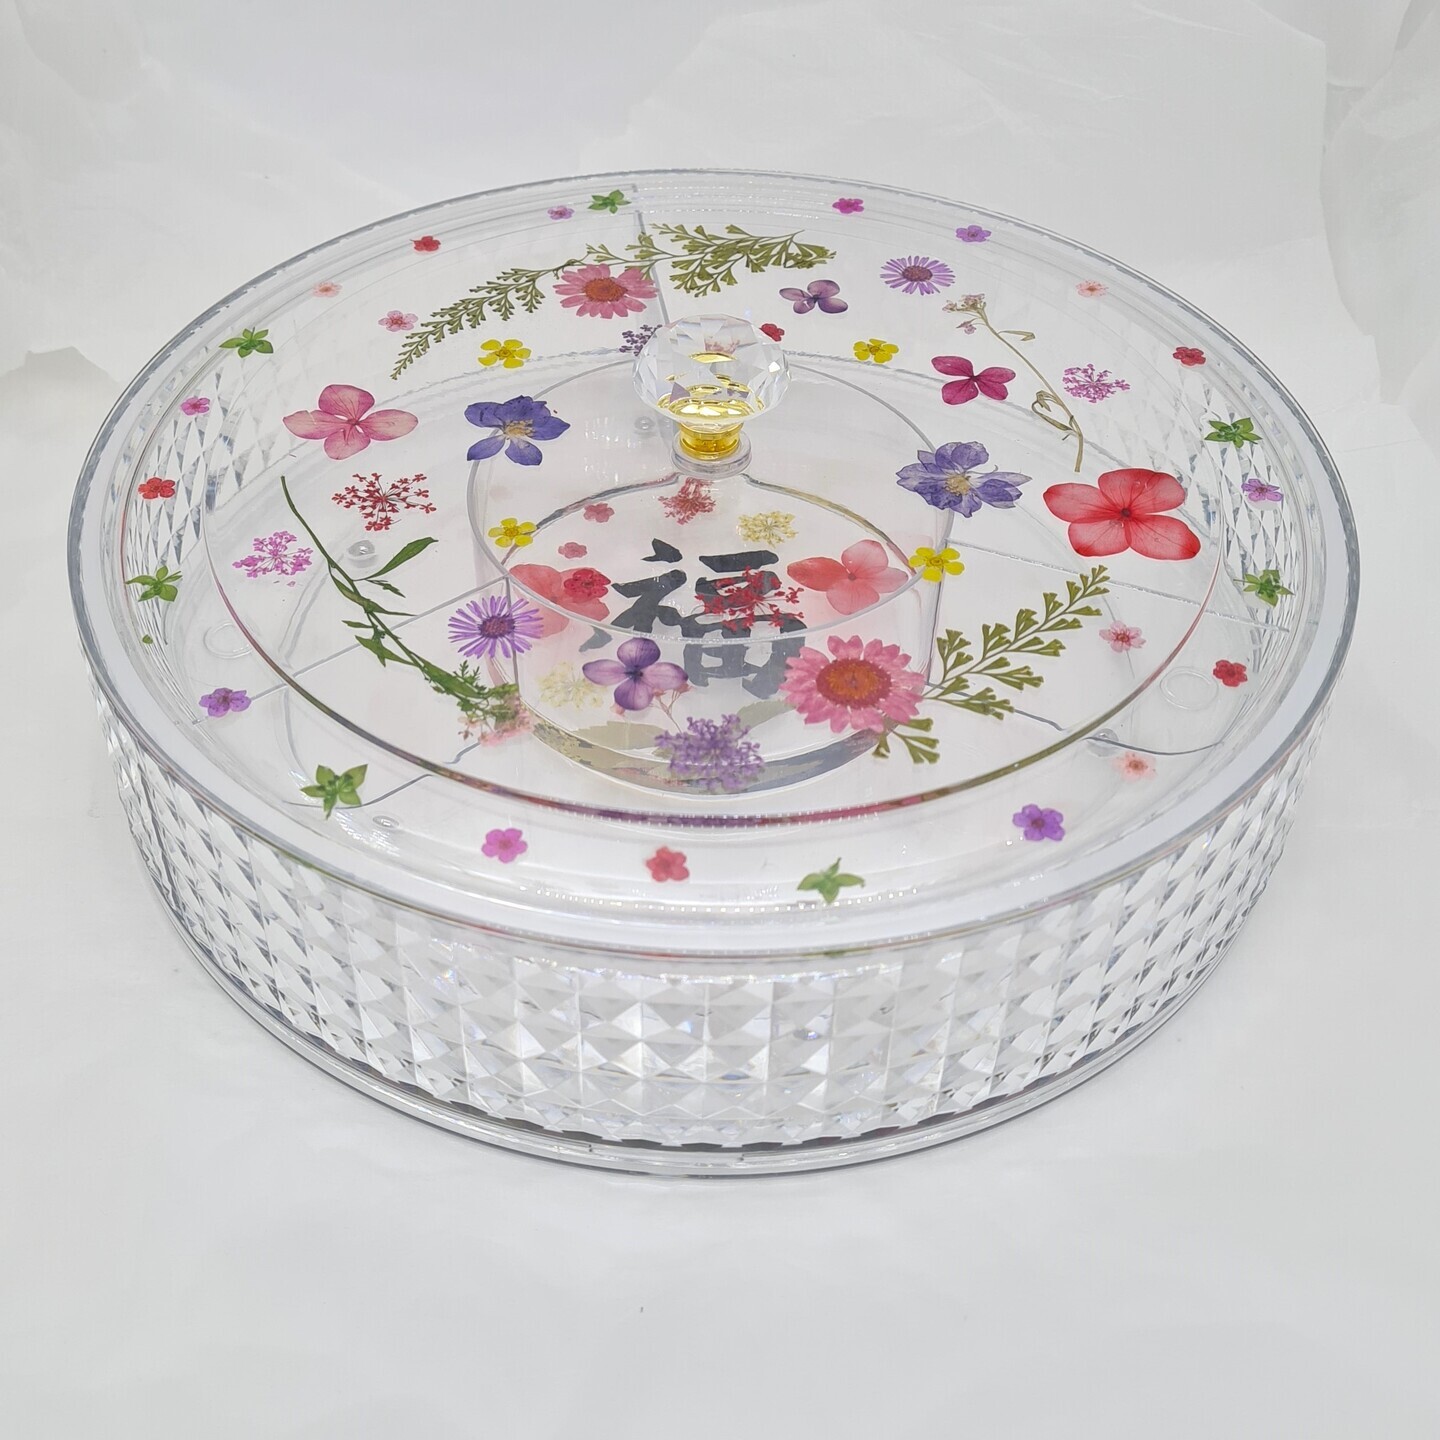 Full Bloom Carousel Cookies trays stackable  handmade with real flowers & leaves on cover & base  Pre-Order